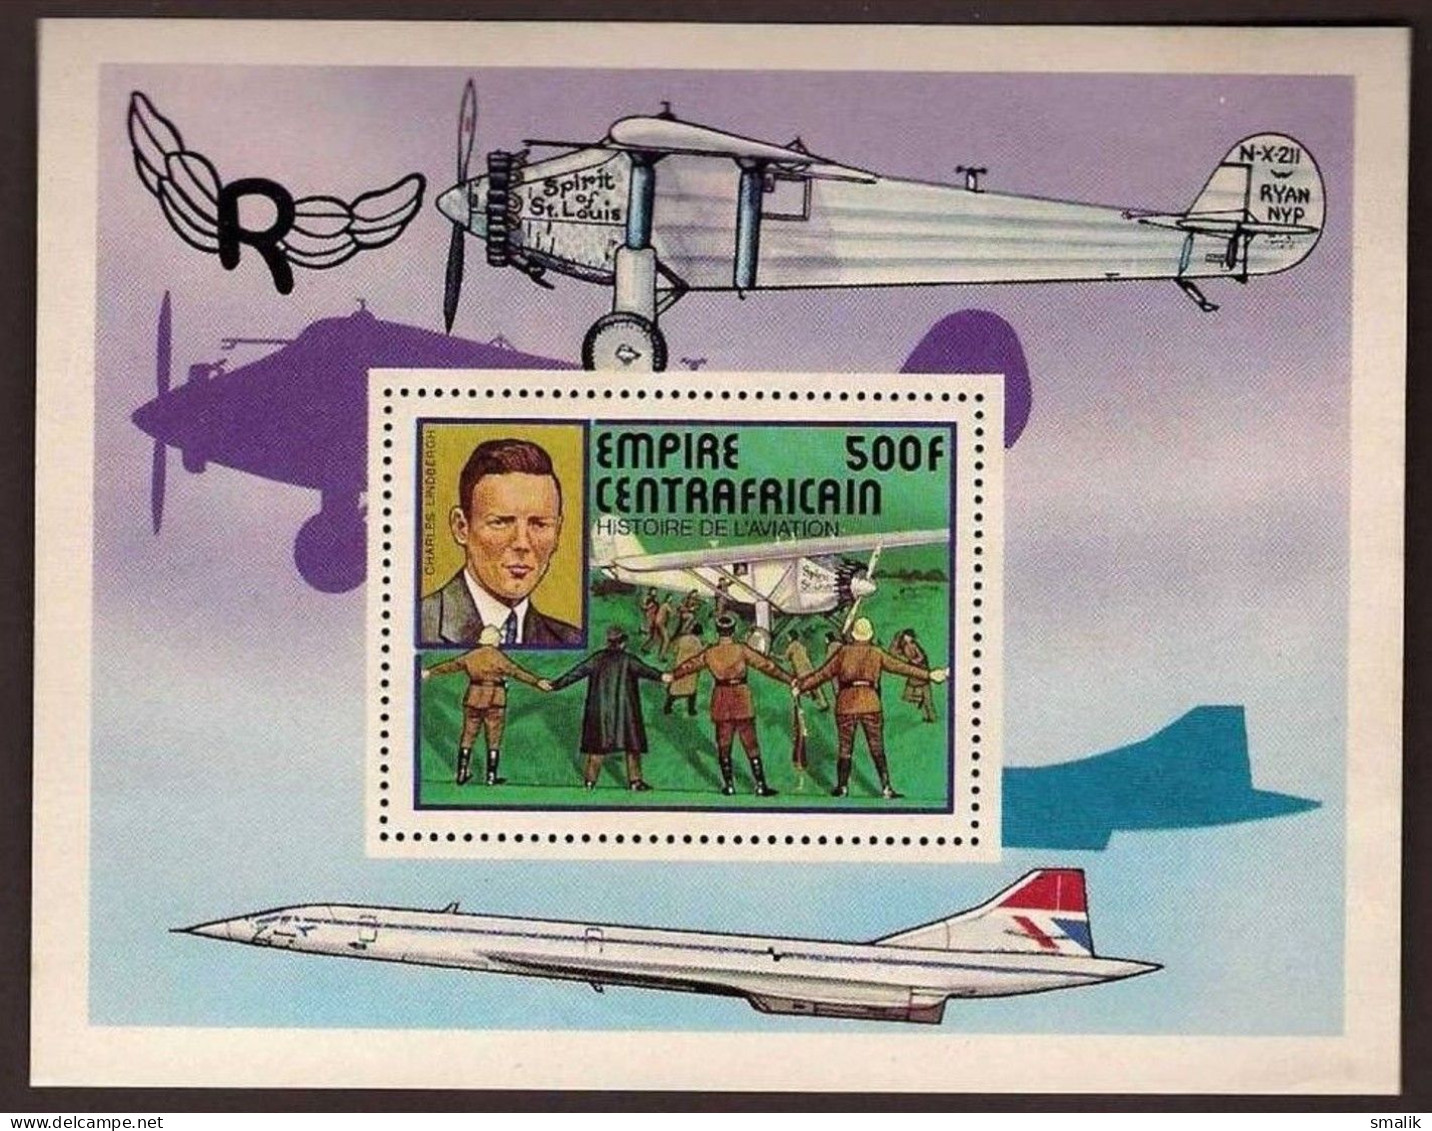 CENTRAL AFRICAN REPUBLIC 1977 - History Of Aviation, Aeroplane, Miniature Sheet MNH - Central African Republic